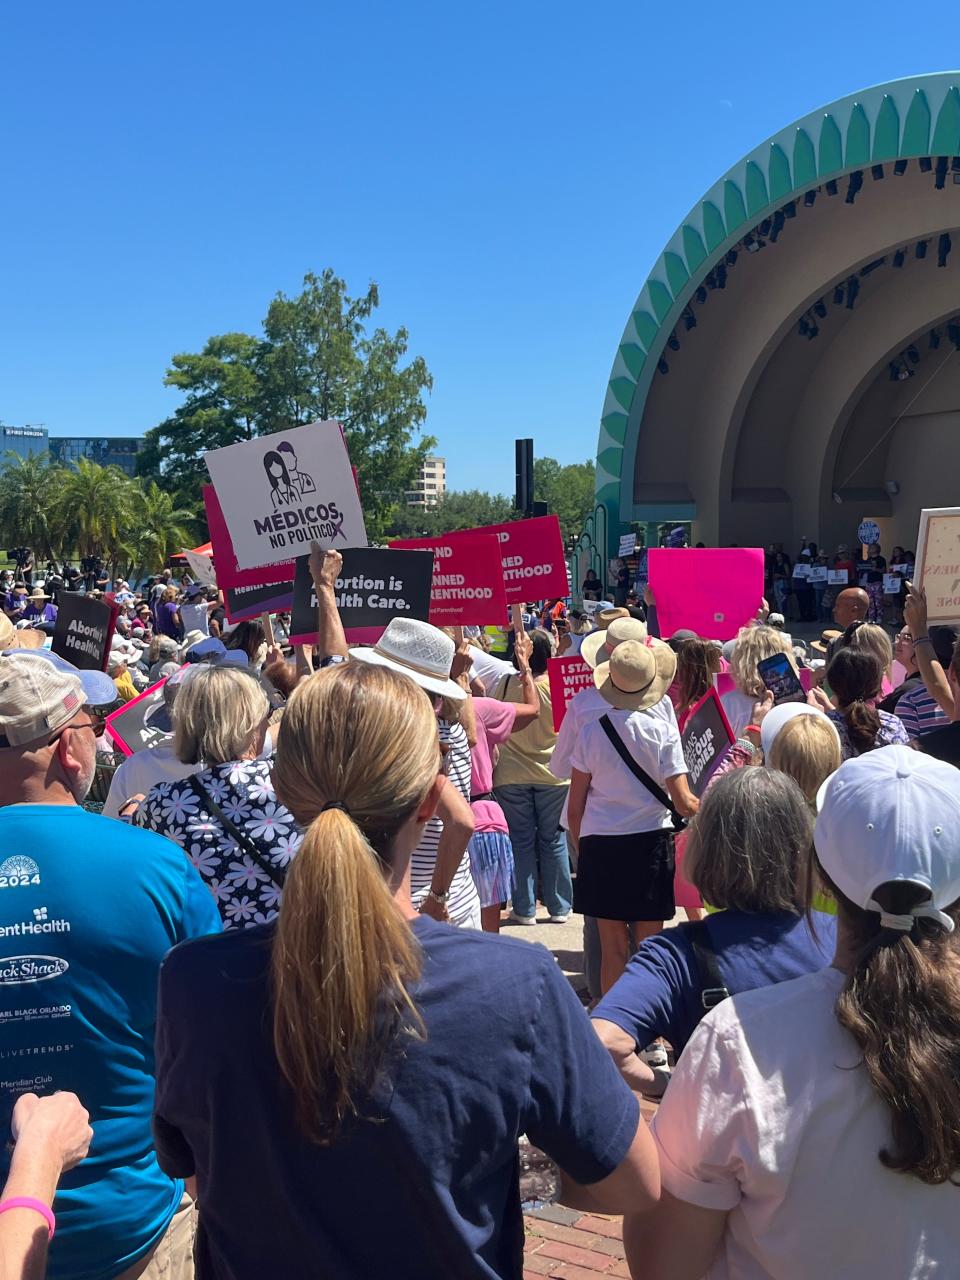 Demonstrators gathered at Lake Eola Park in Orlando over the weekend in support and opposition of reproductive rights in the Sunshine State. Around 3,000 people attended the rally organized by a coalition of state and regional organizations.